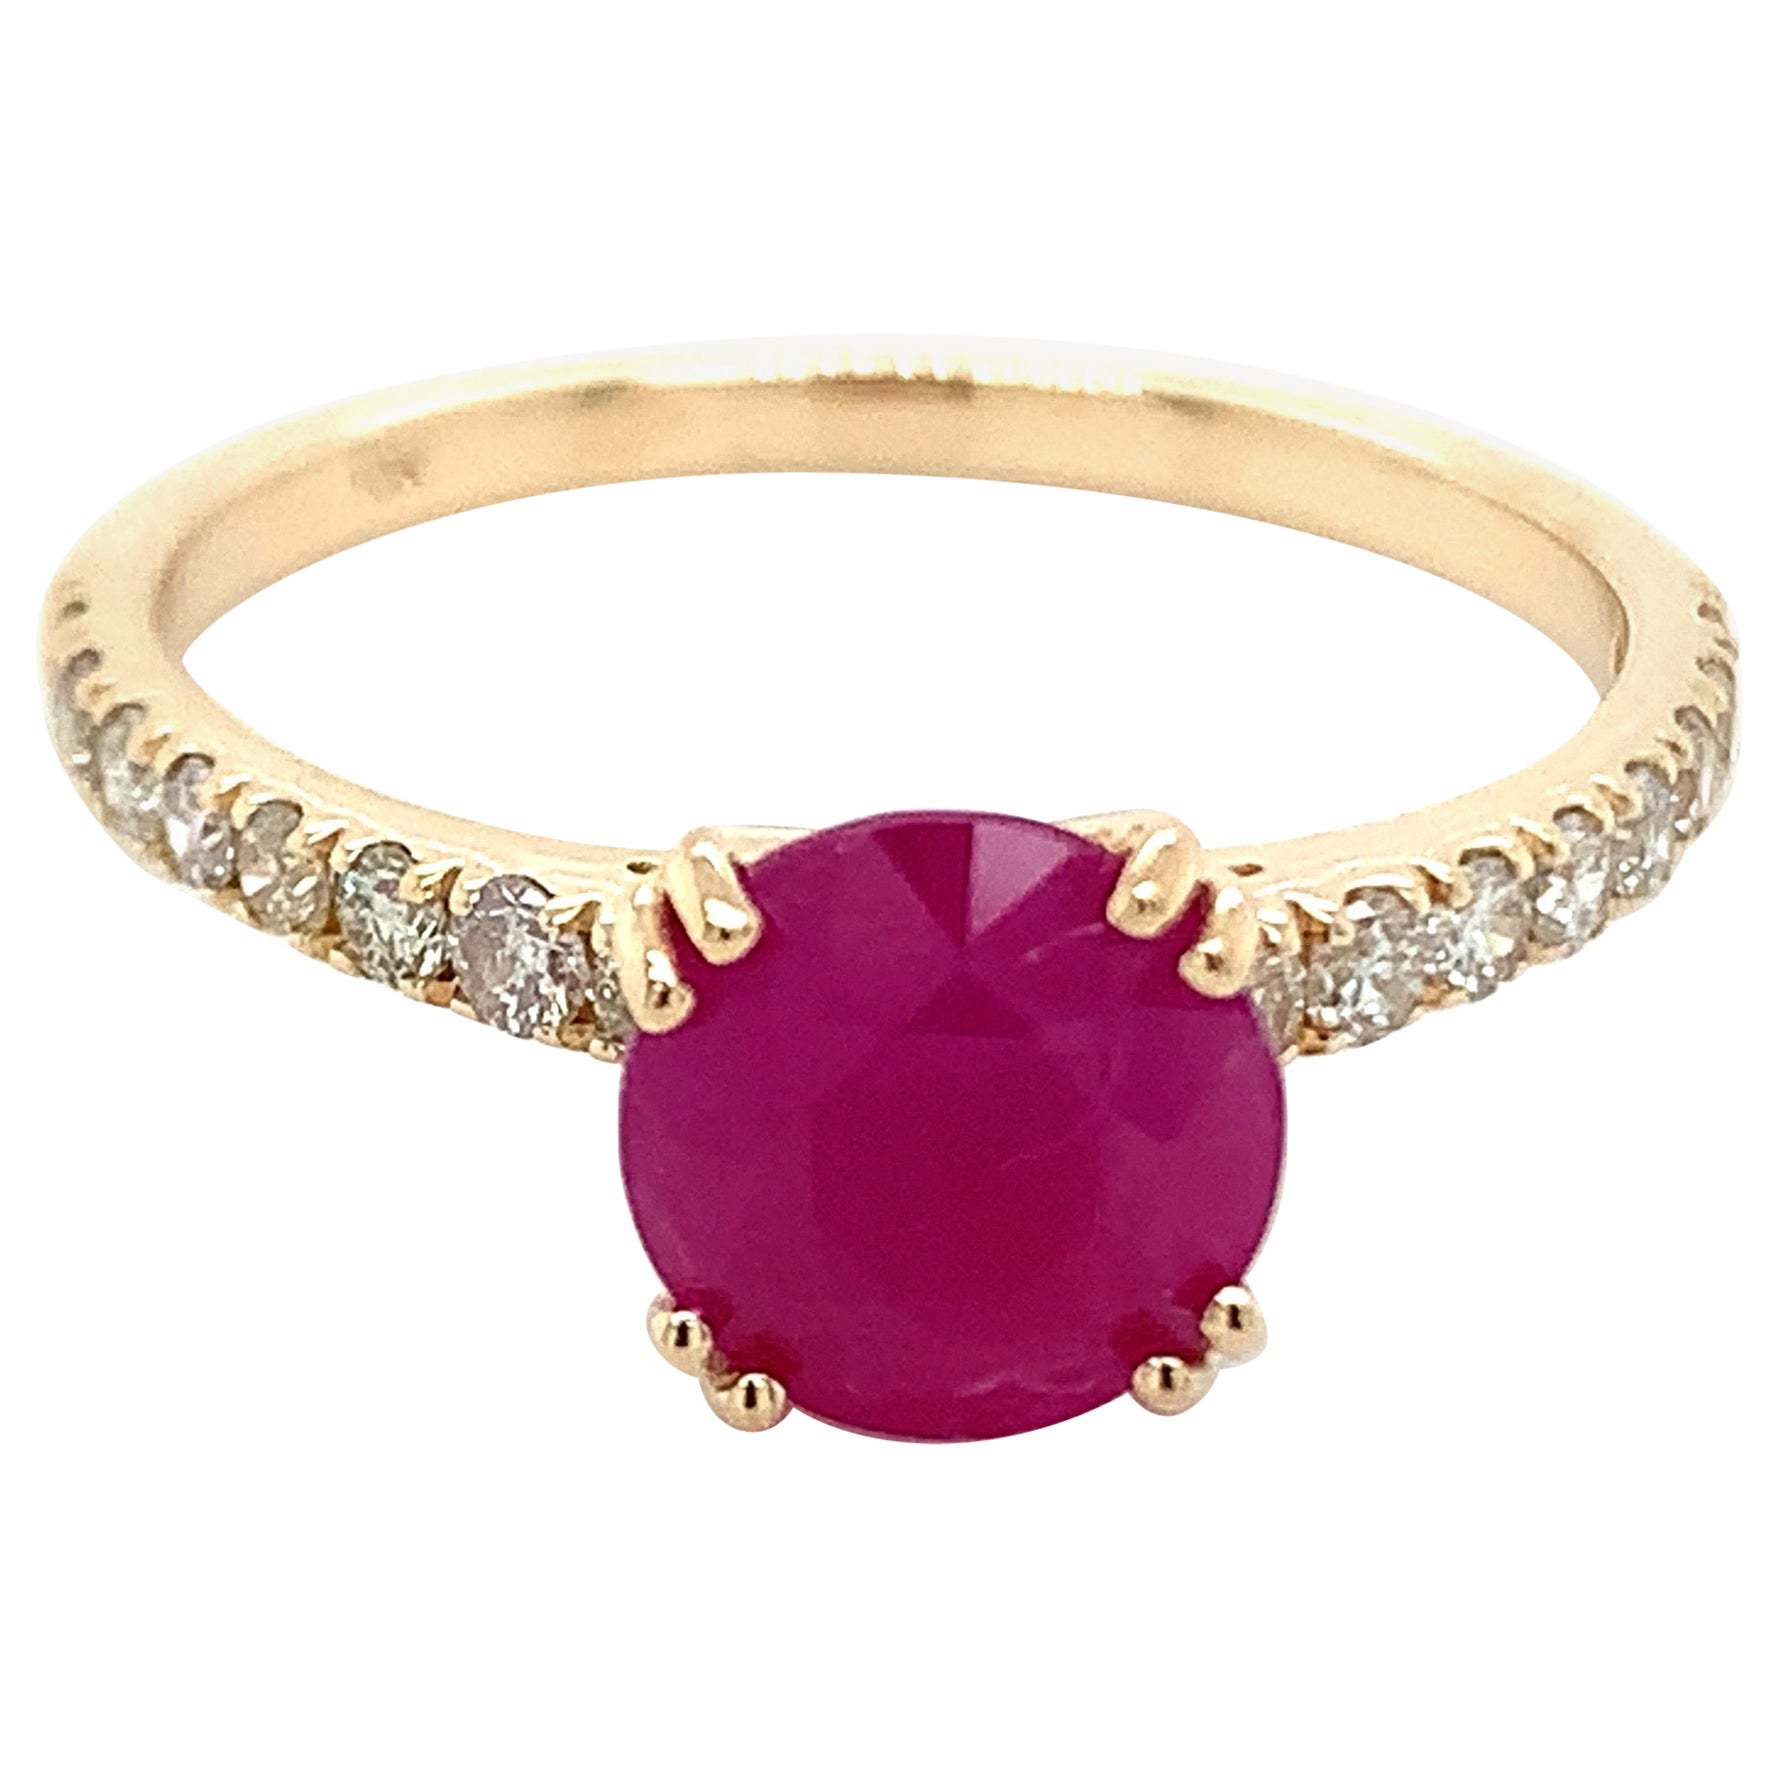 1.65 Carat Round Shape Ruby Ring with Diamonds in 10k Yellow Gold